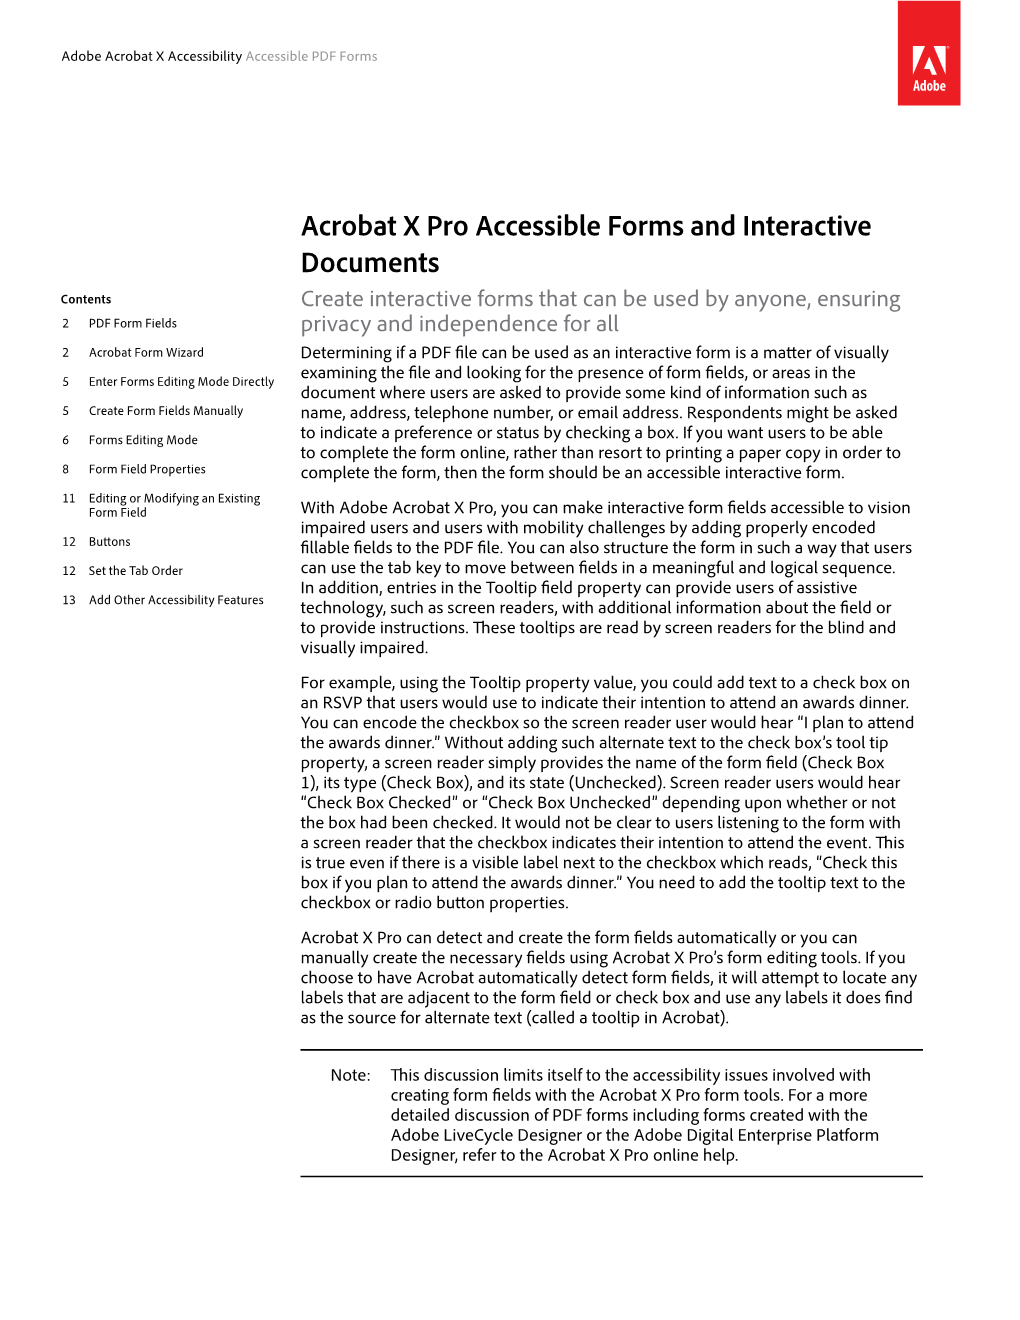 Adobe Acrobat X Accessibility Accessible PDF Forms